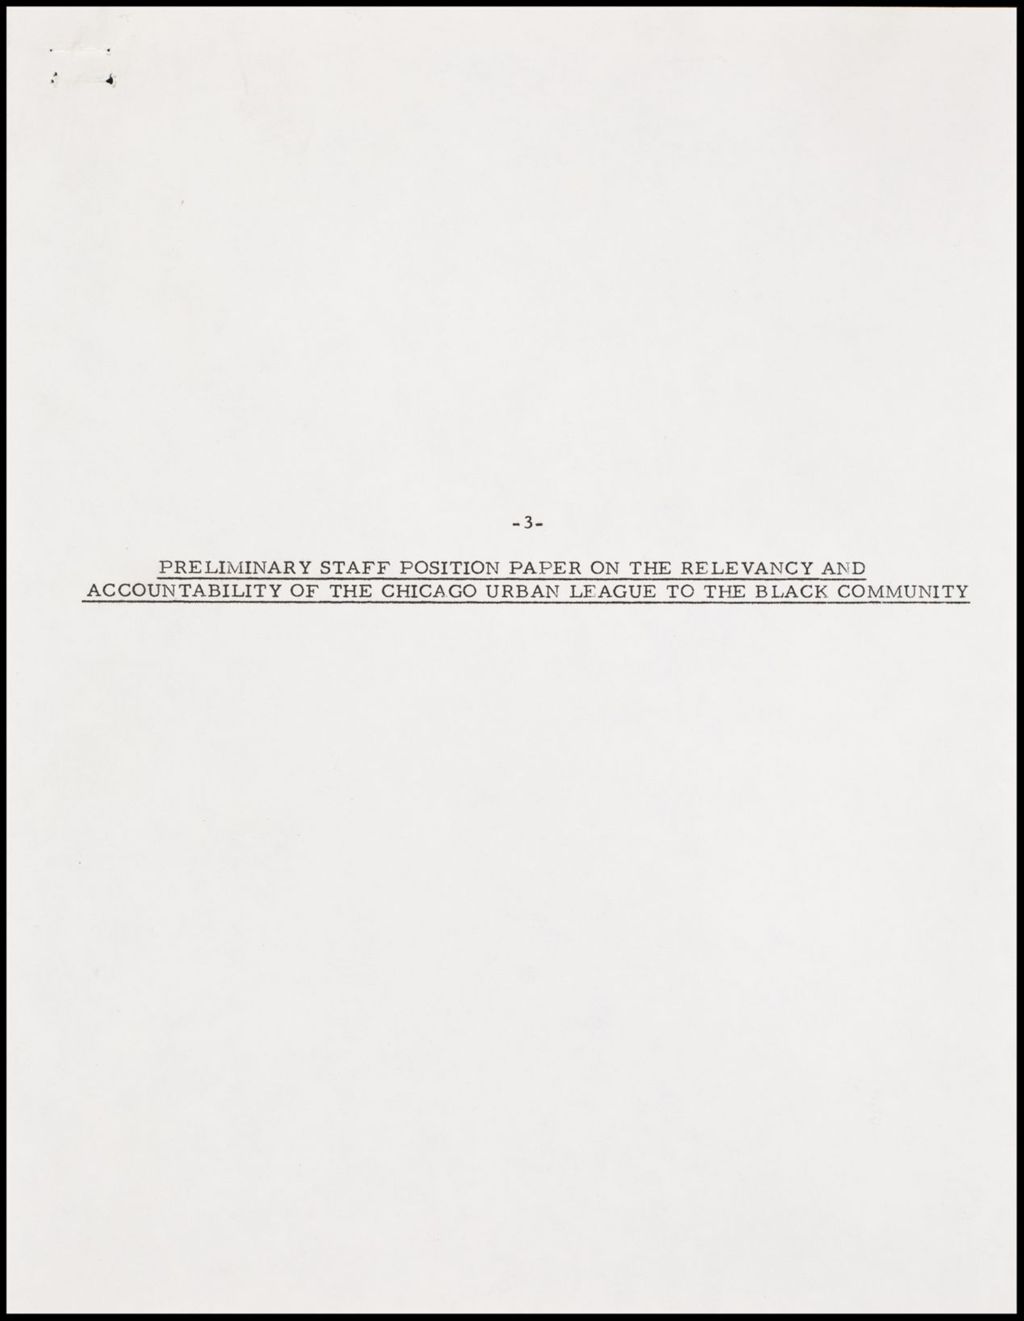 Preliminary Staff Position Paper on the Relevancy and Accountability of the CUL to the Black Community, 1968 (Folder IV-696)